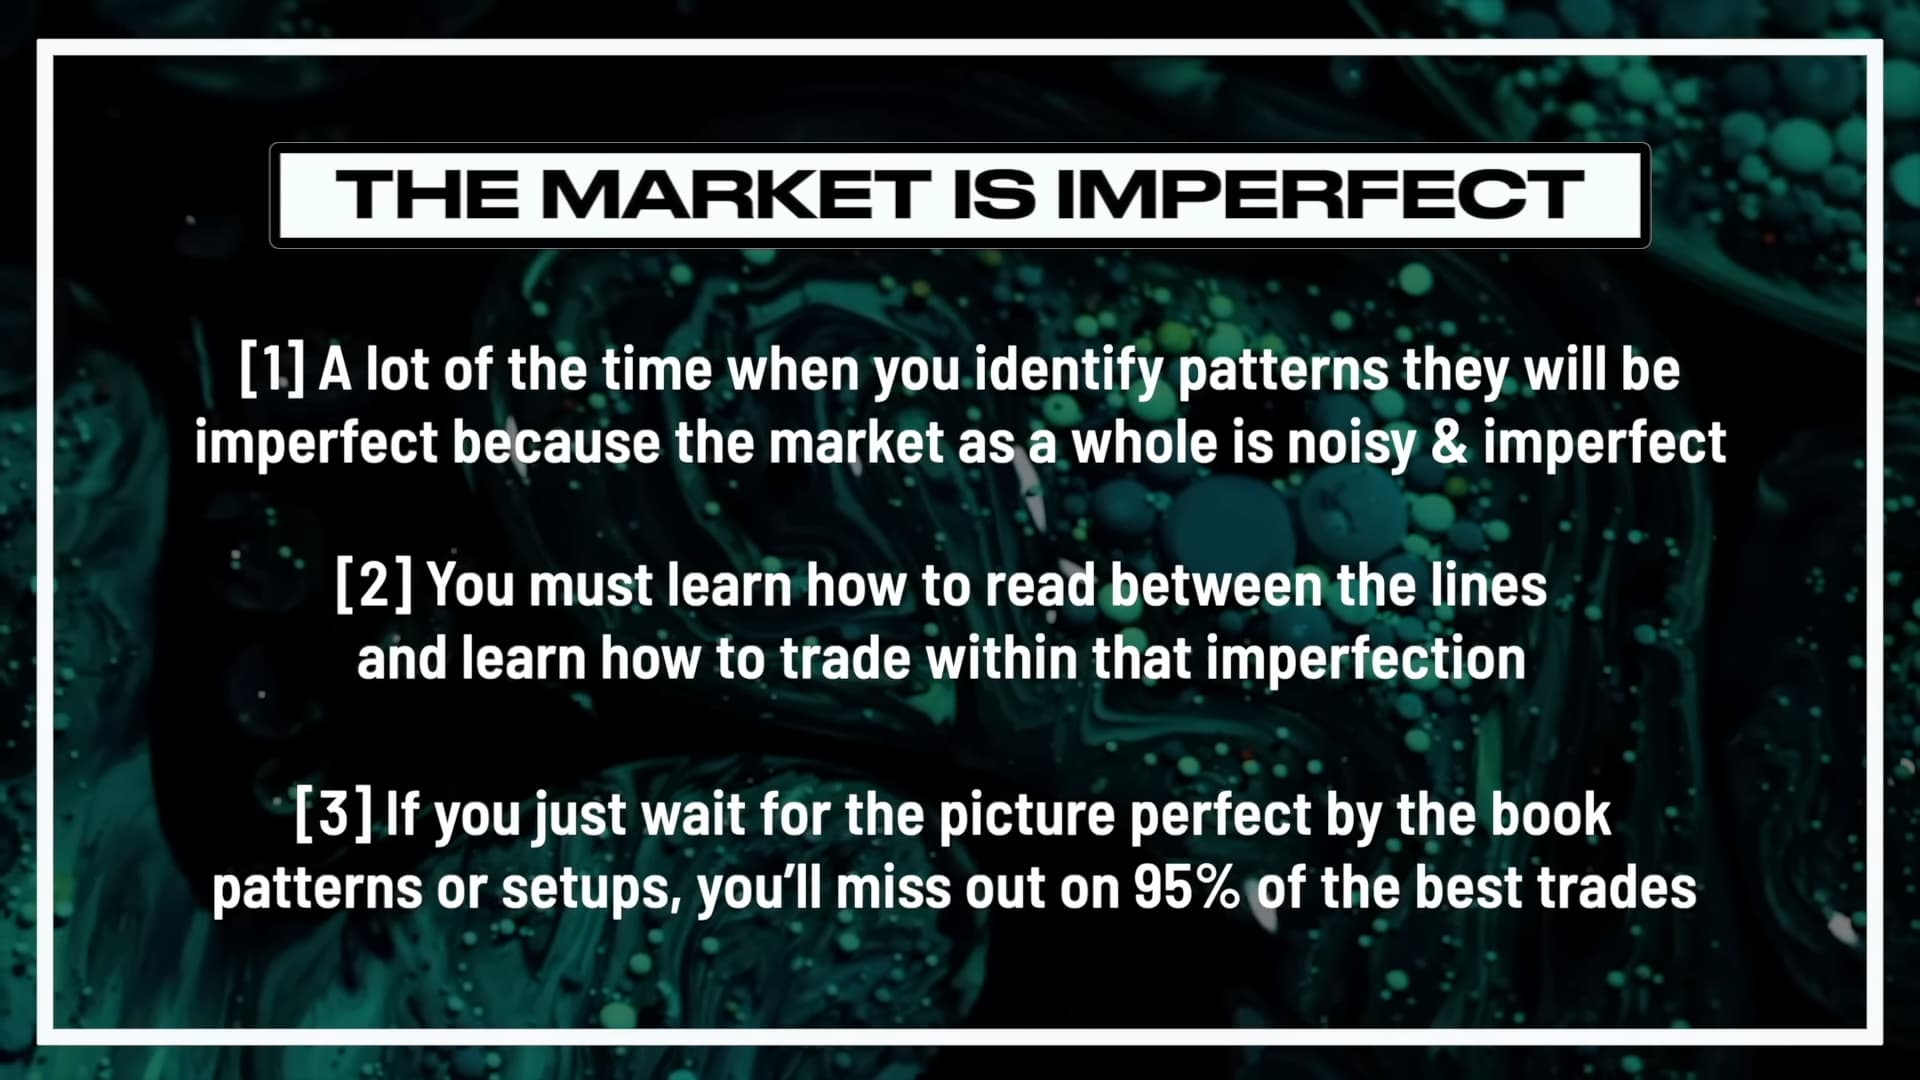 THE-MARKET-IS-IMPERFECT